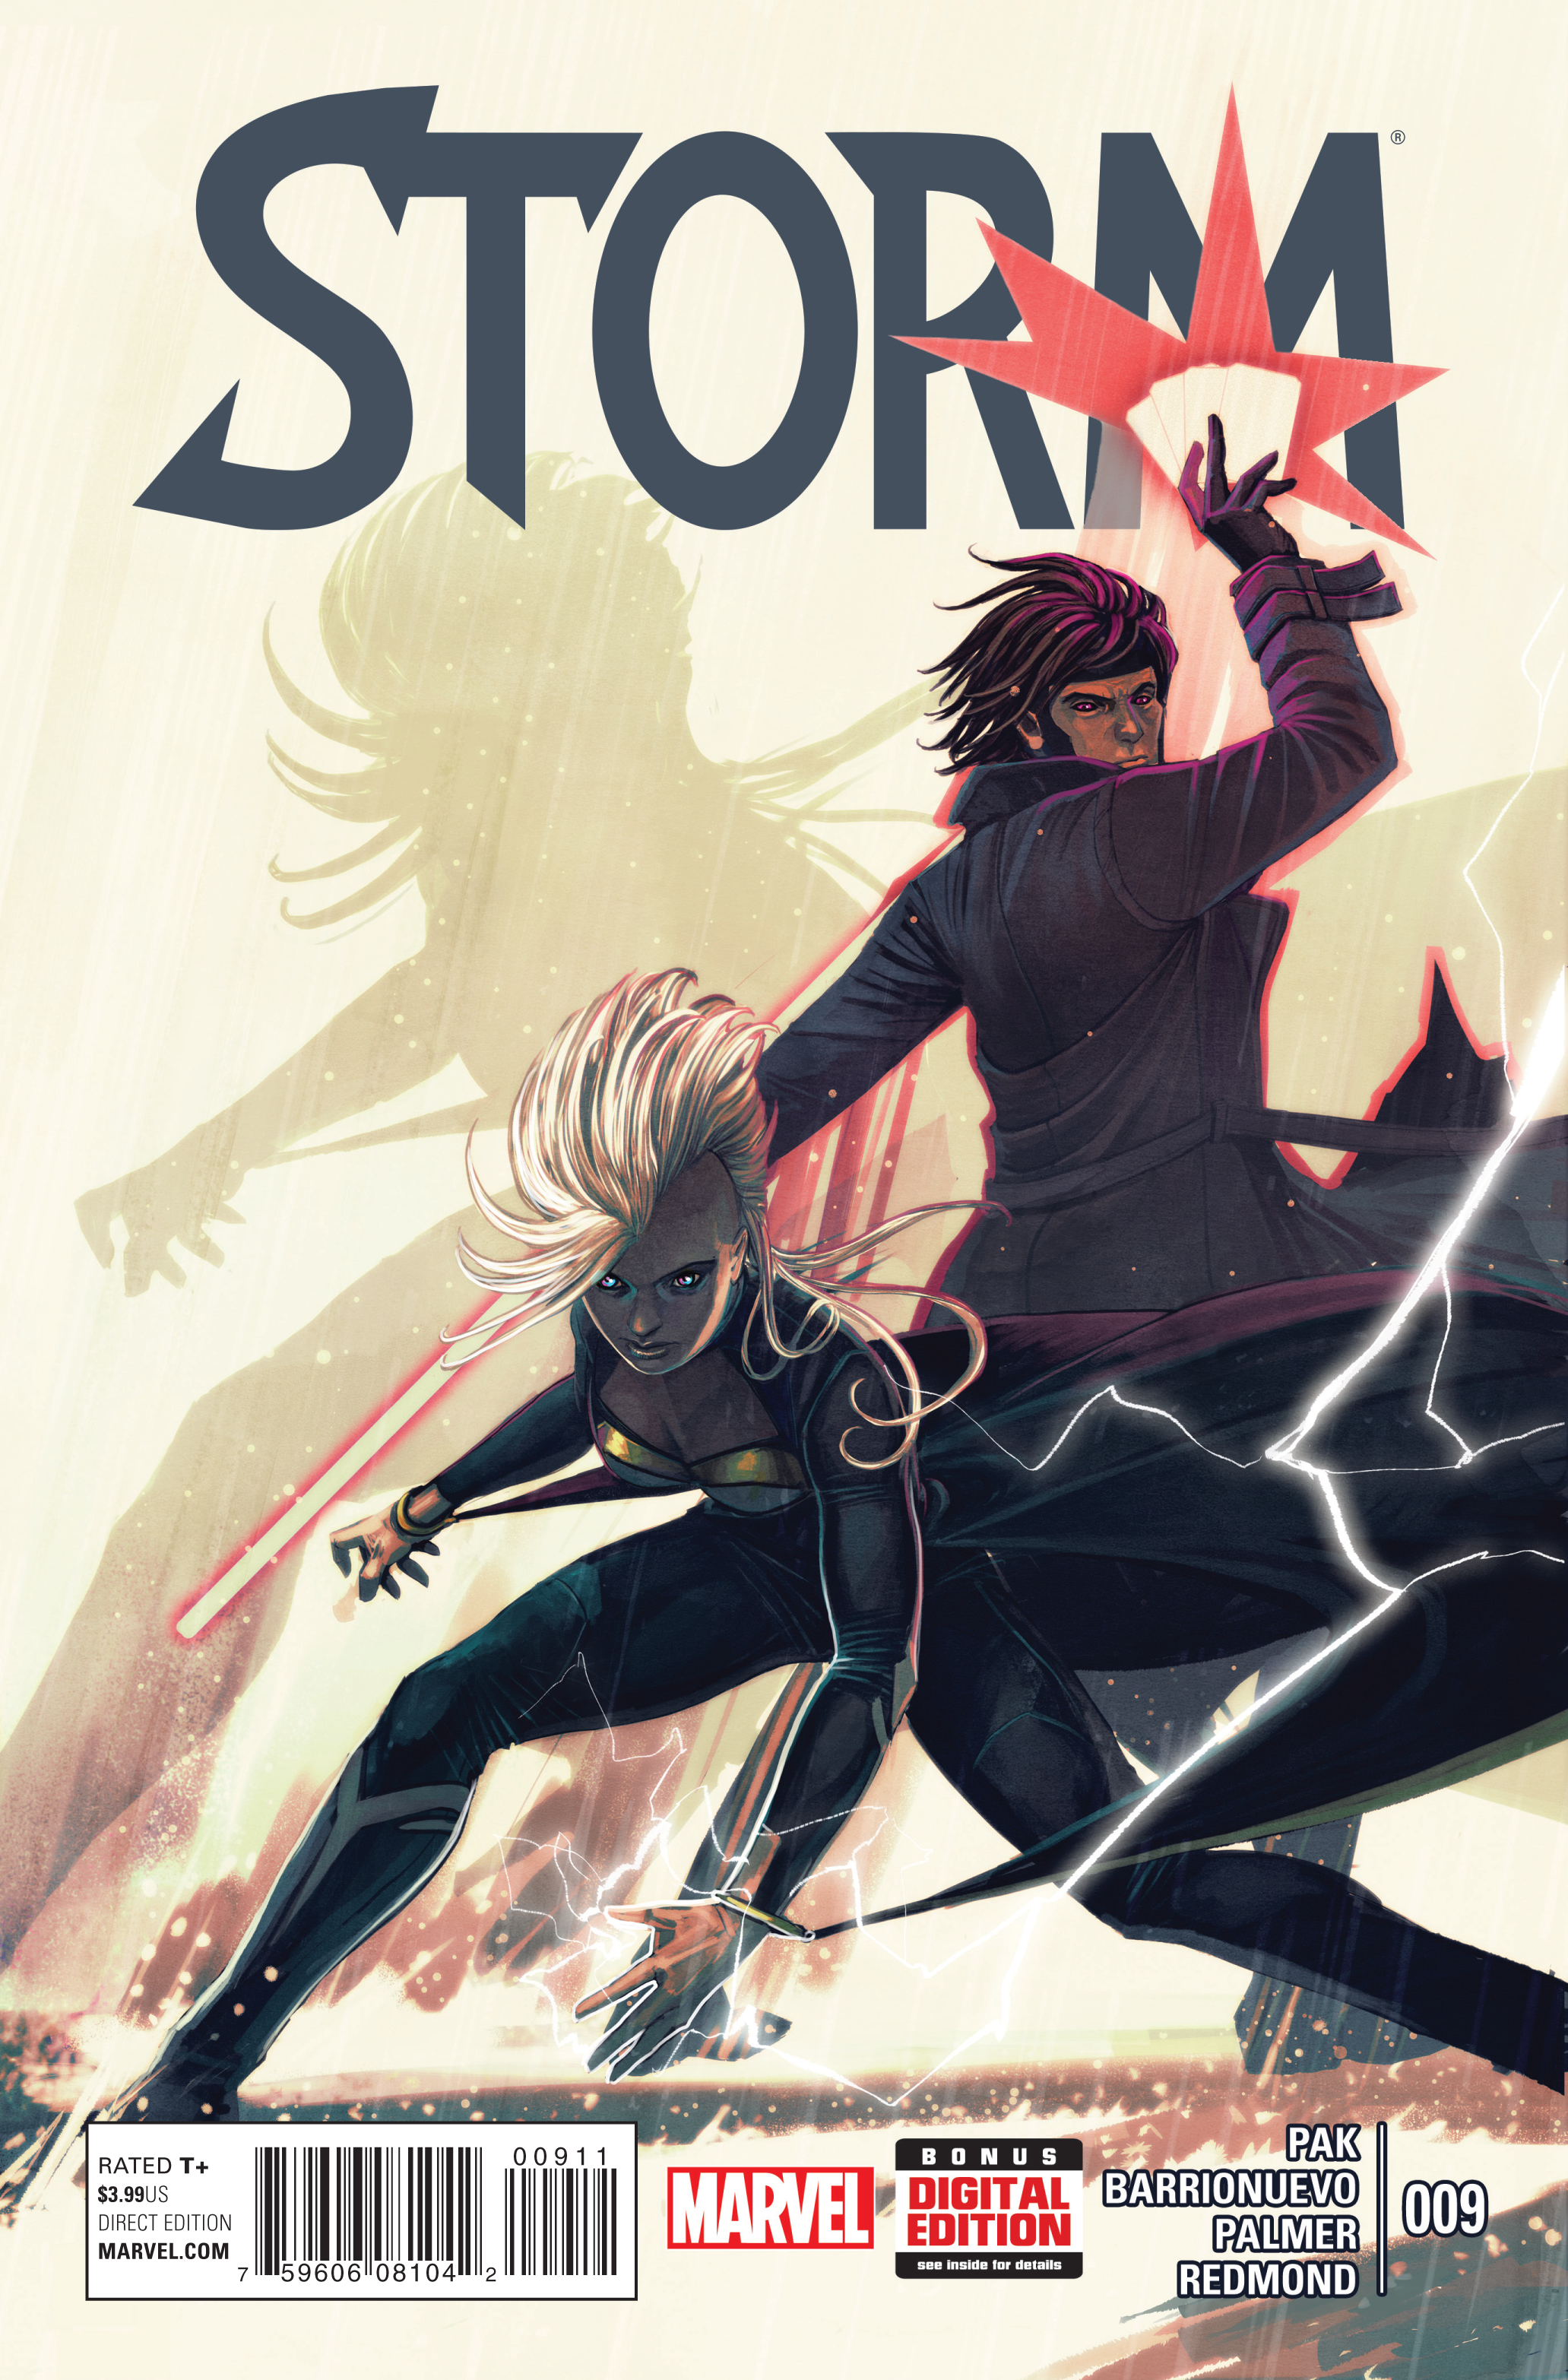 Storm #9 cover